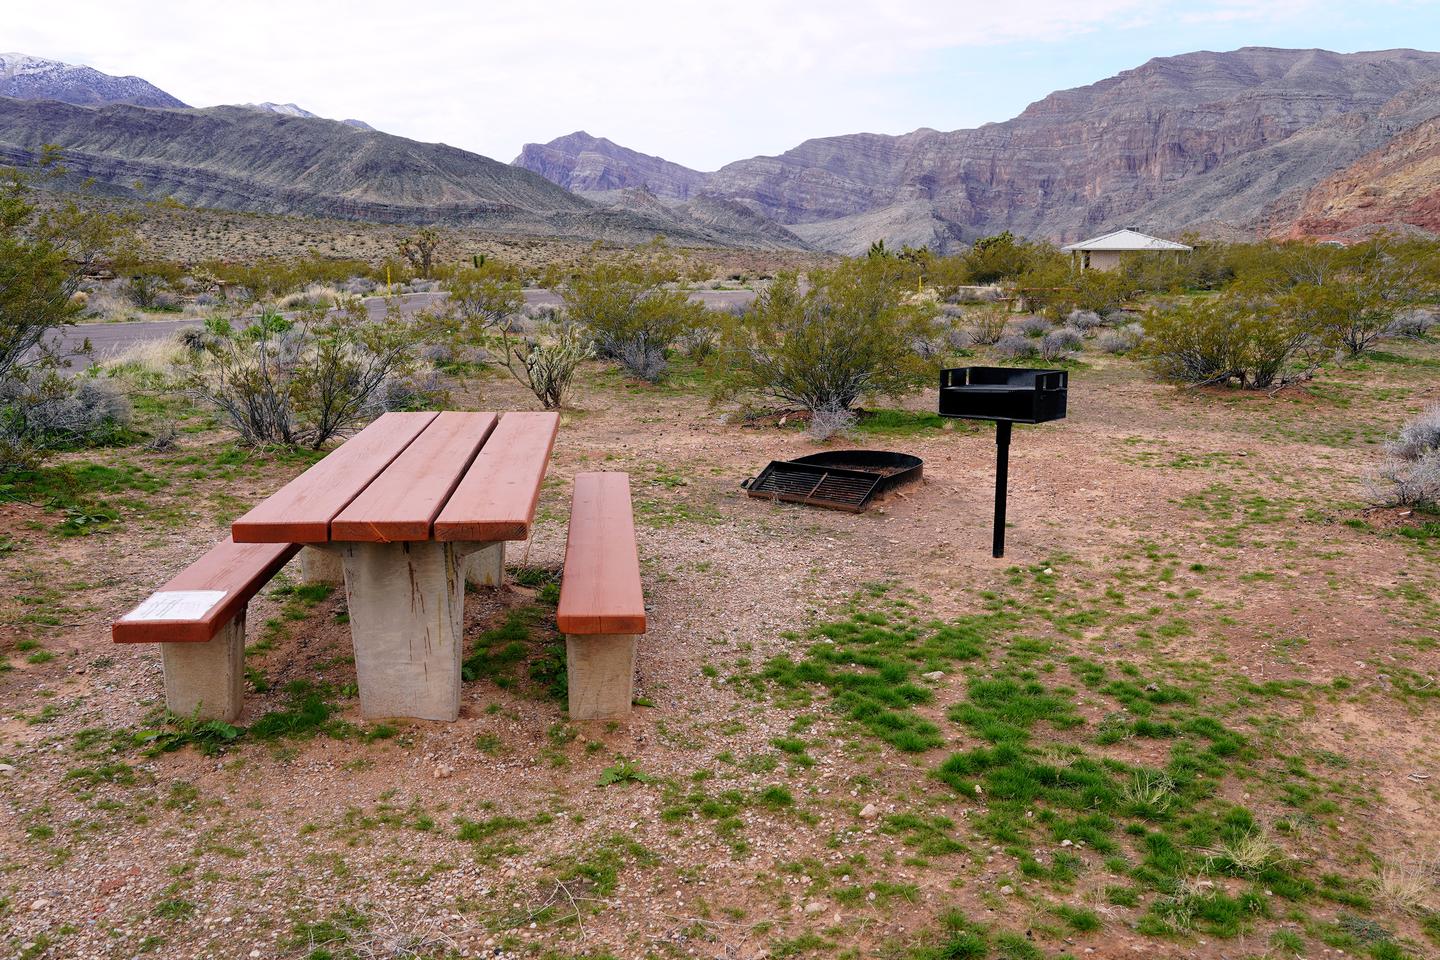 Site 38 AmenditiesShowing the picnic table and grill of Site 38